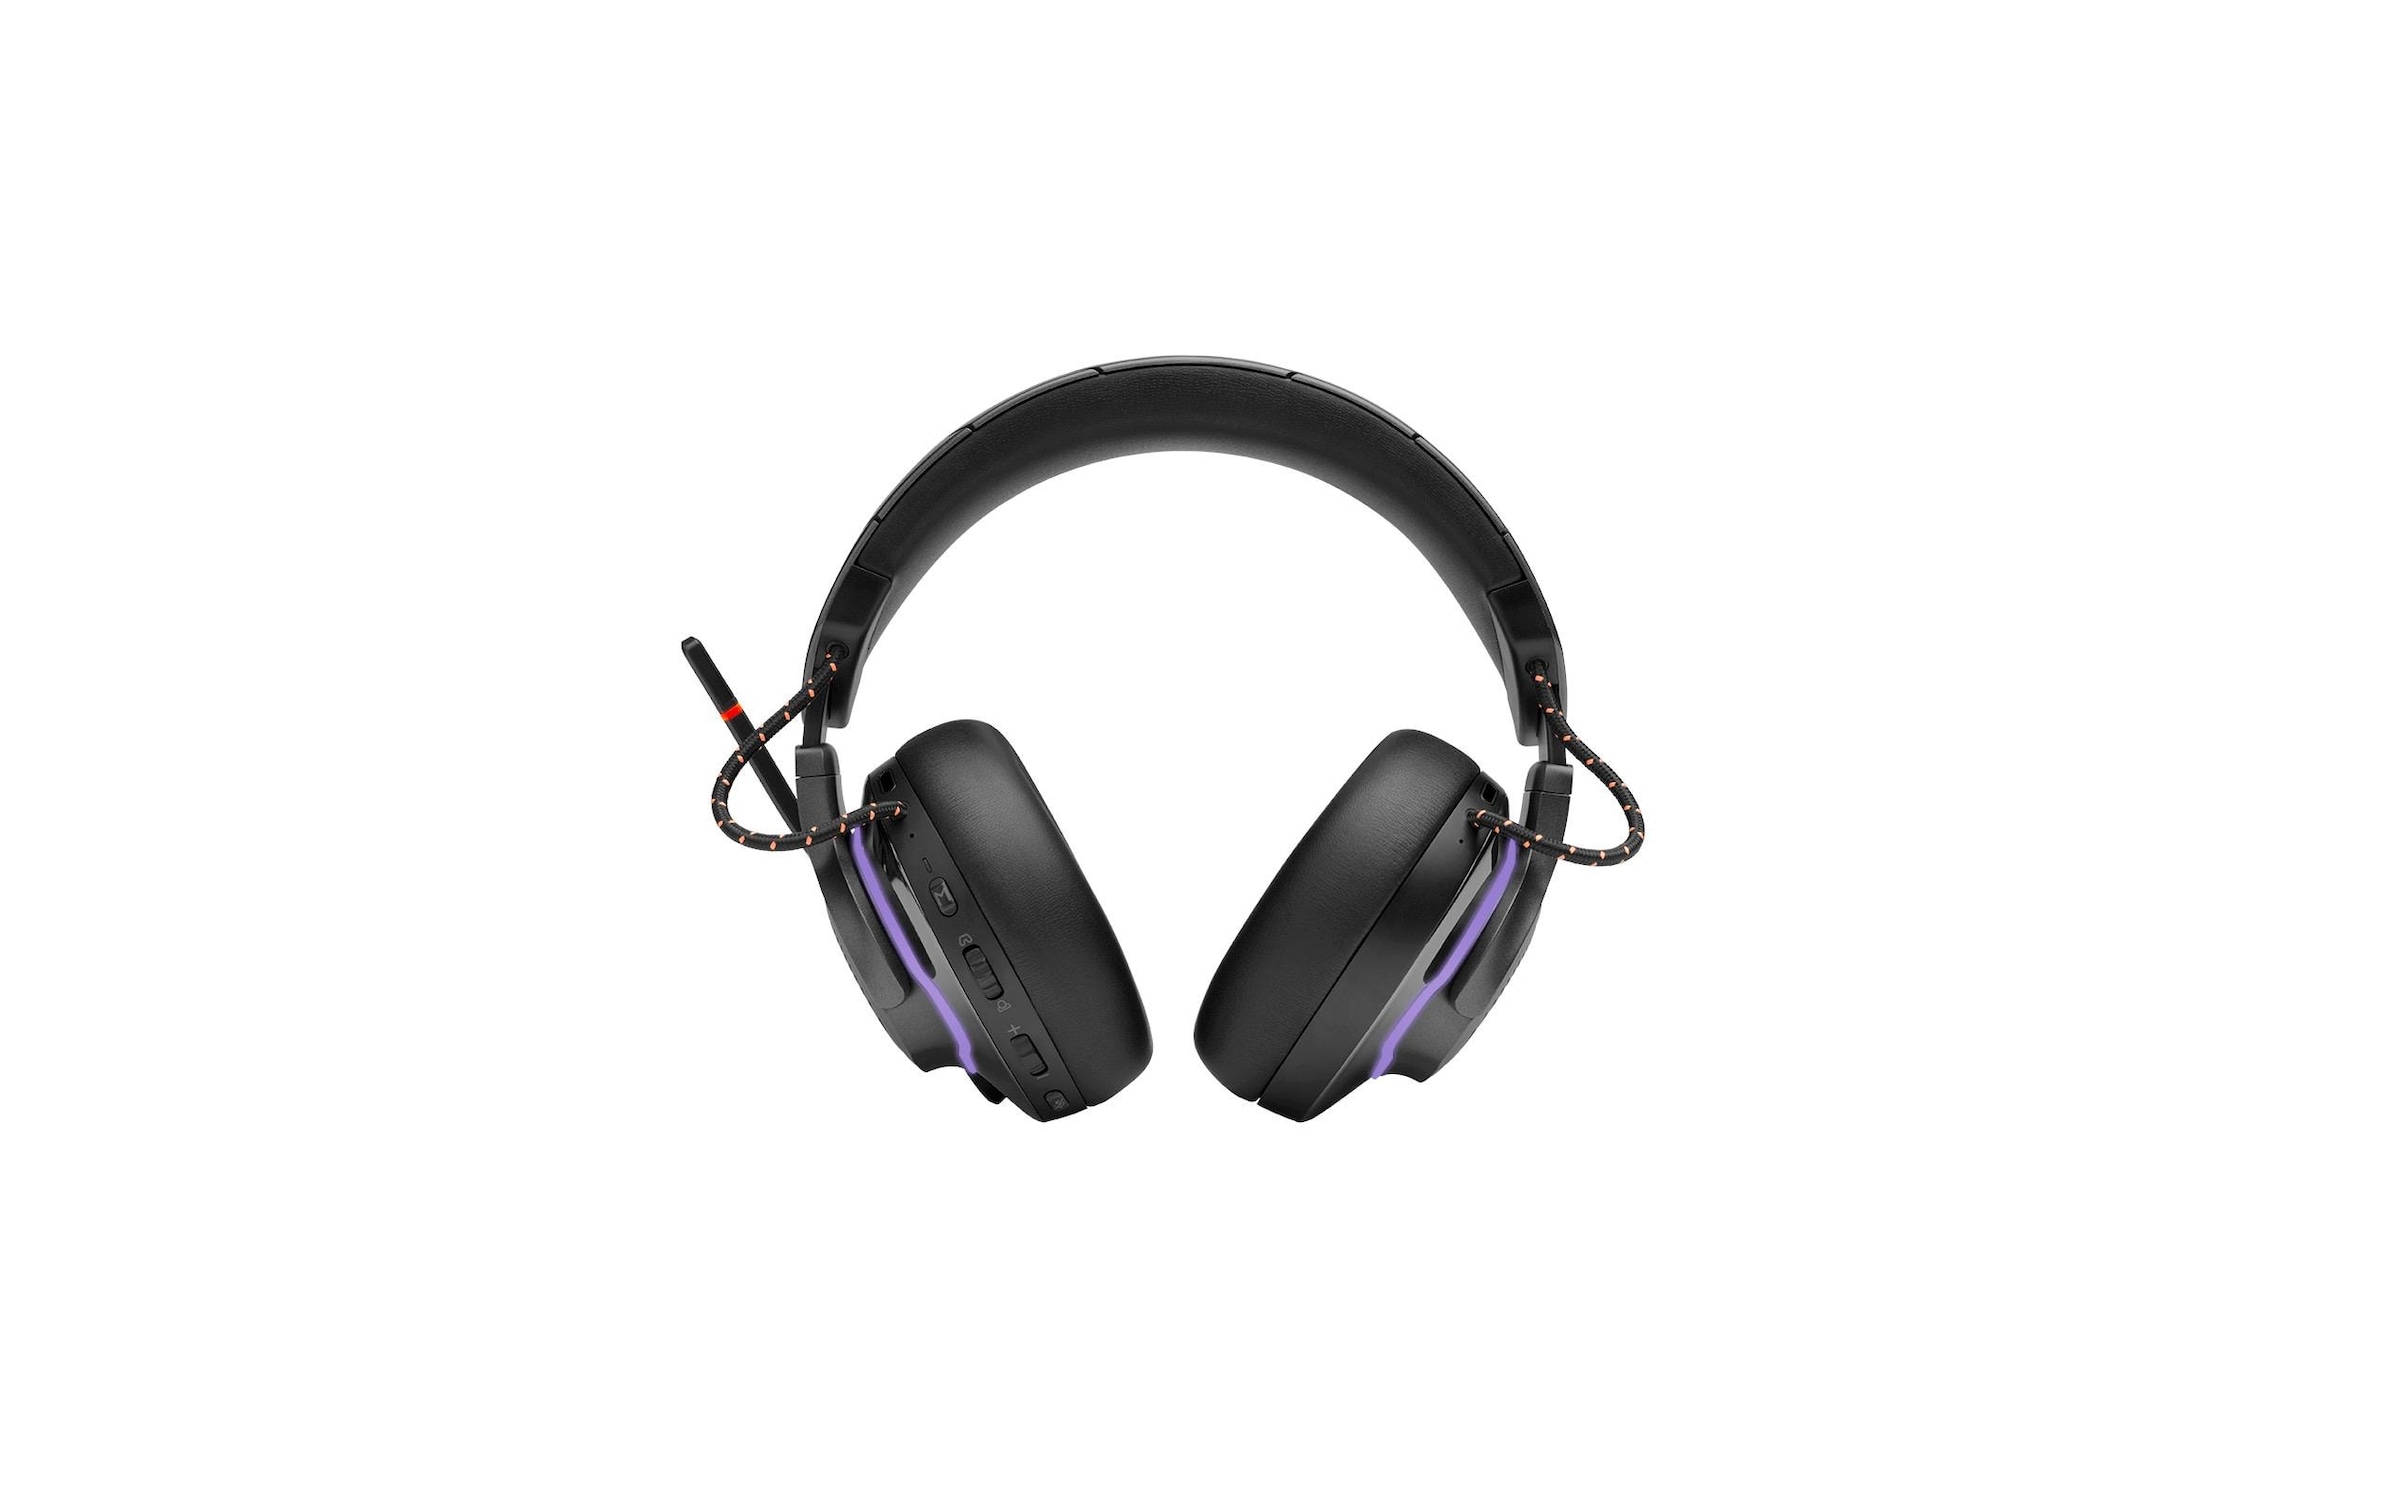 ➥ Turtle Beach Gaming-Headset »Headset Stealth 700 G2 Max blk